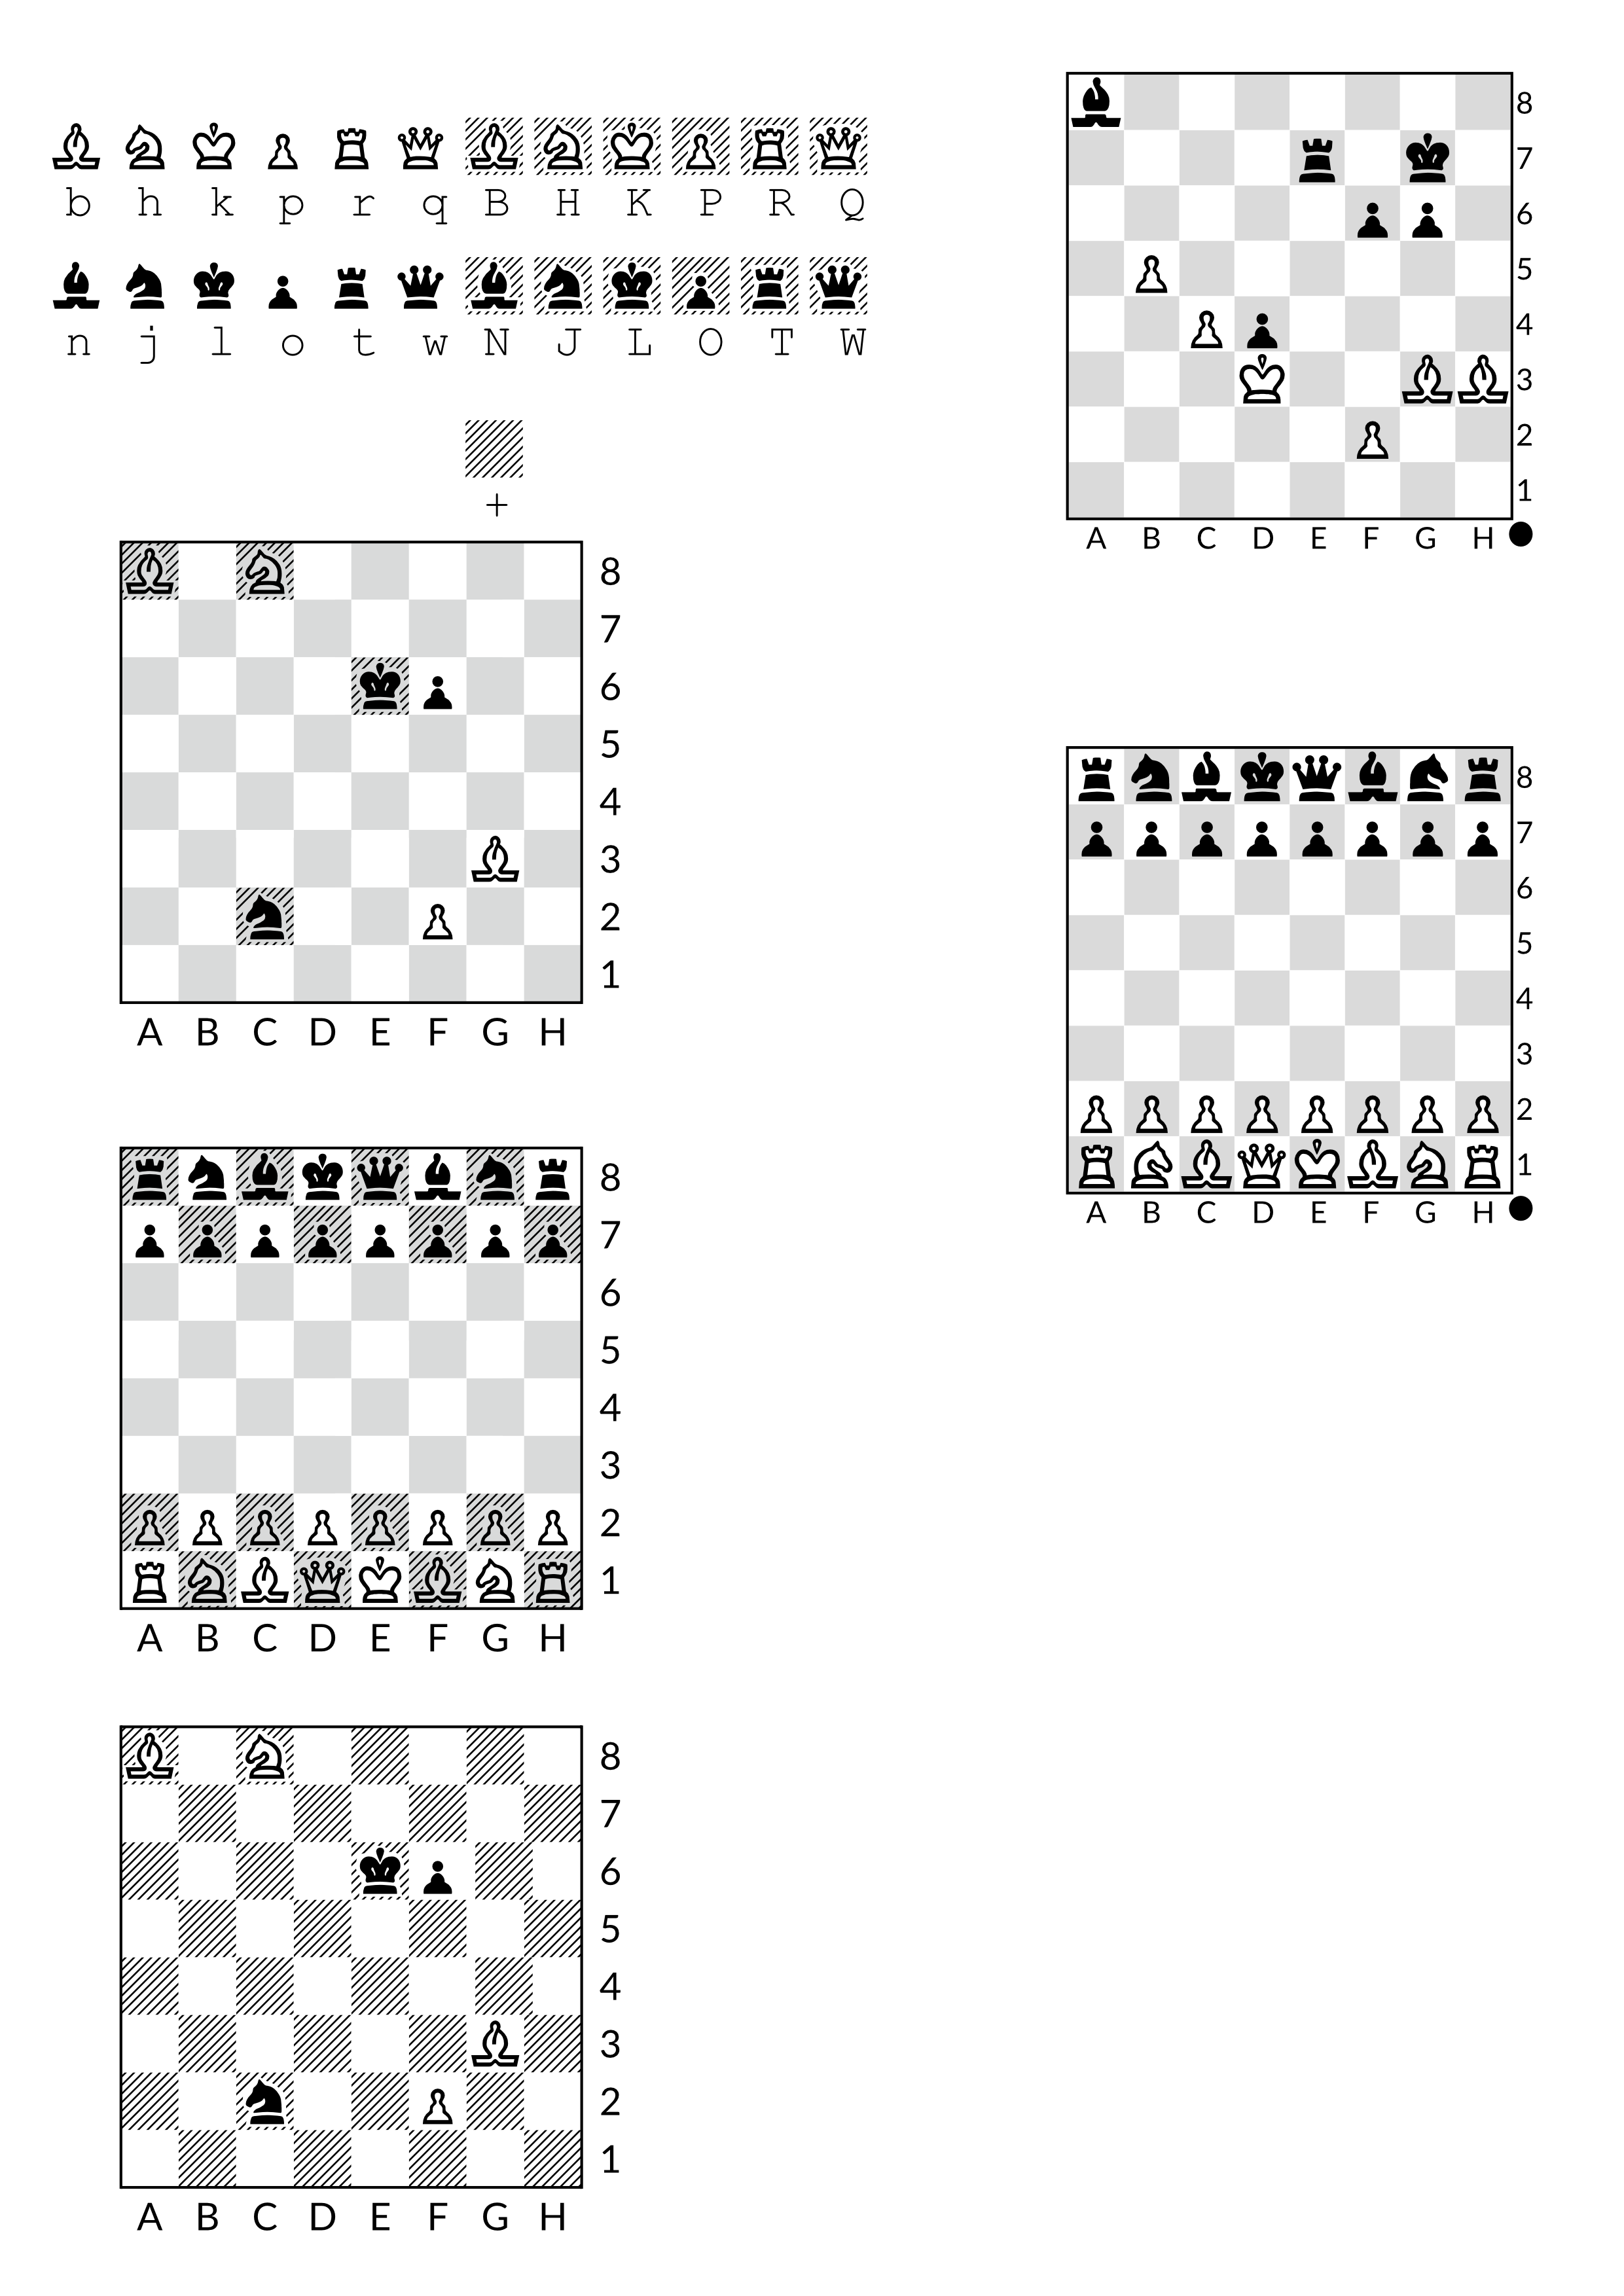 why i cant upload  background? - Chess Forums 